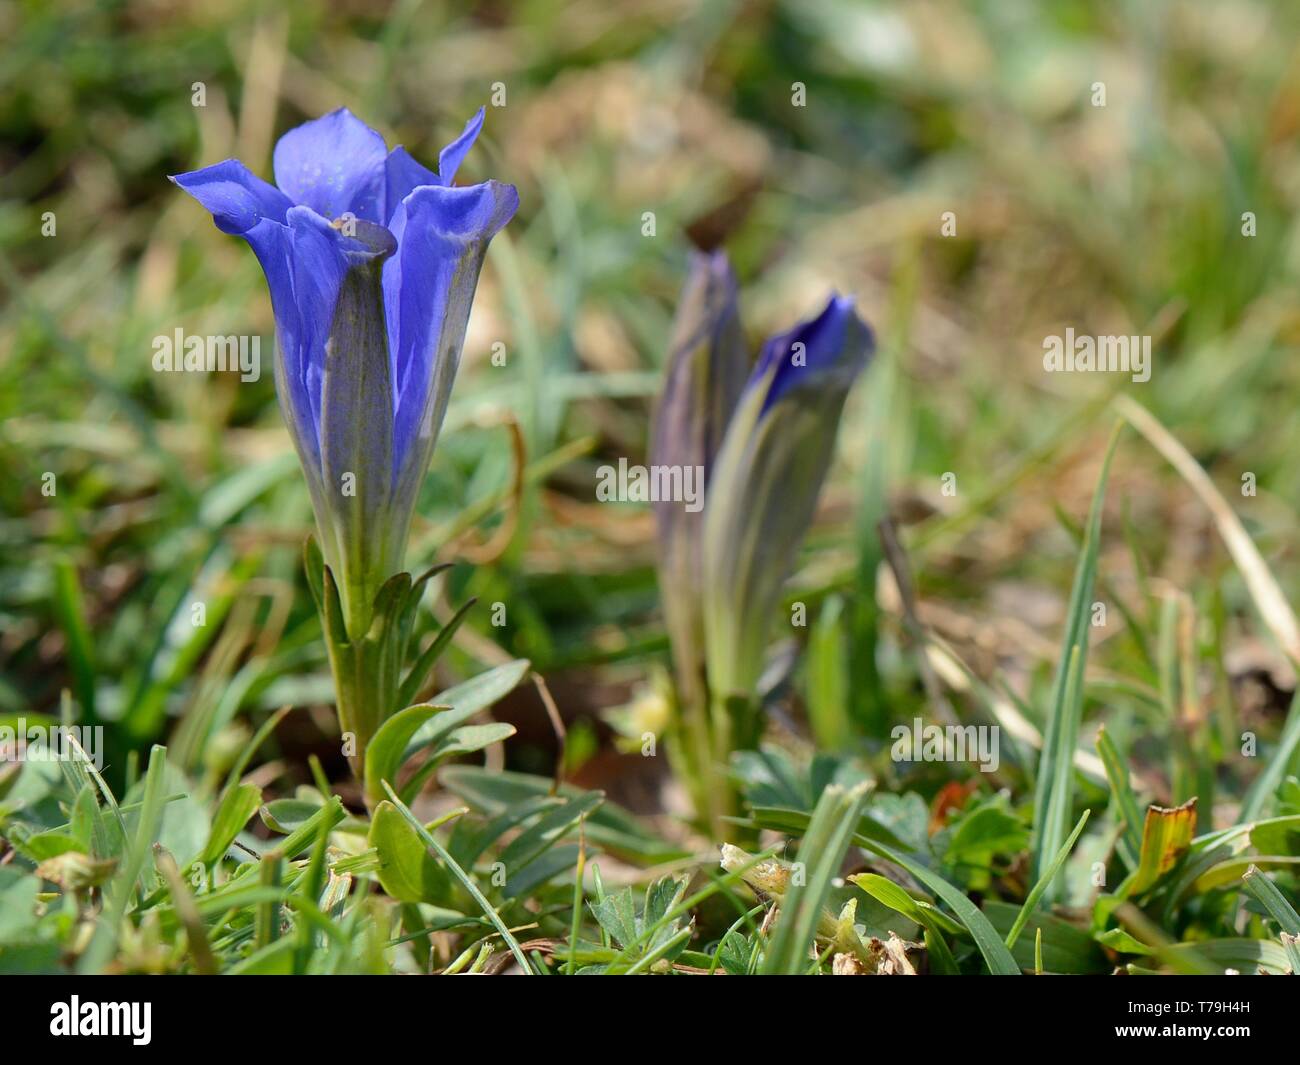 Pyrenean trumpet gentian (Gentiana occidentalis), an endemic species of northern Spain and the Pyrenees, in bloom, Picos de Europa, Spain, August. Stock Photo